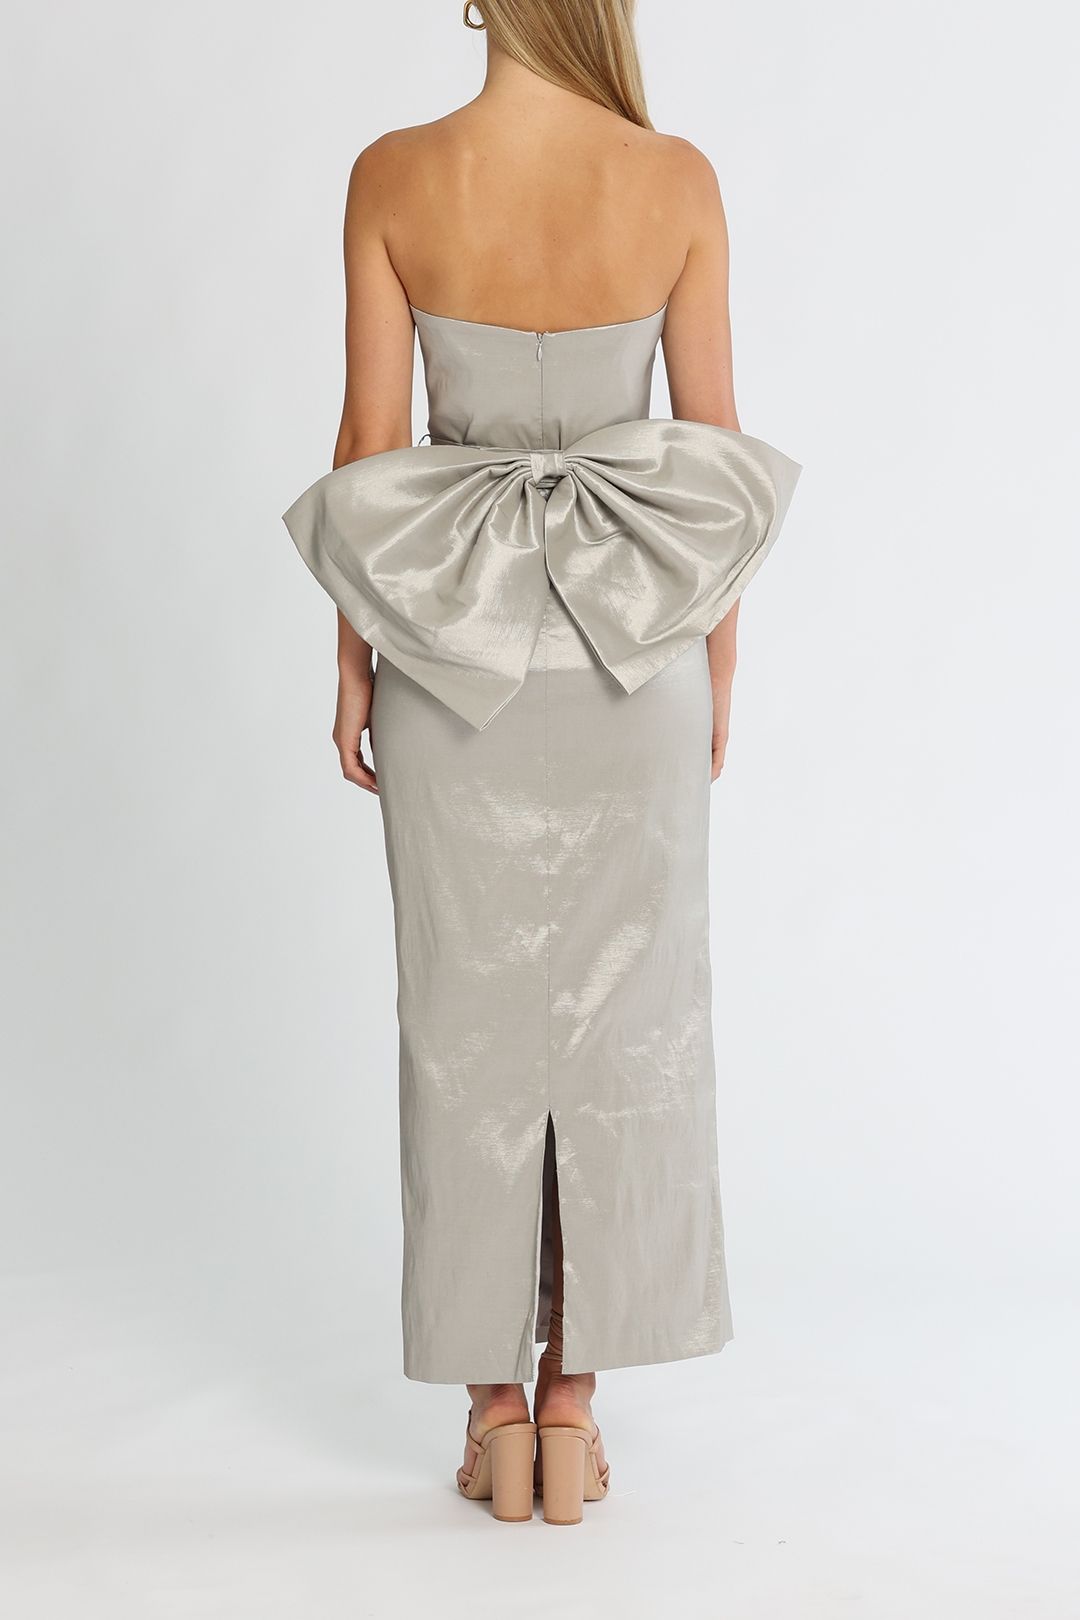 Elle Zeitoune Fitted Strapless Dress Silver Bow Detail